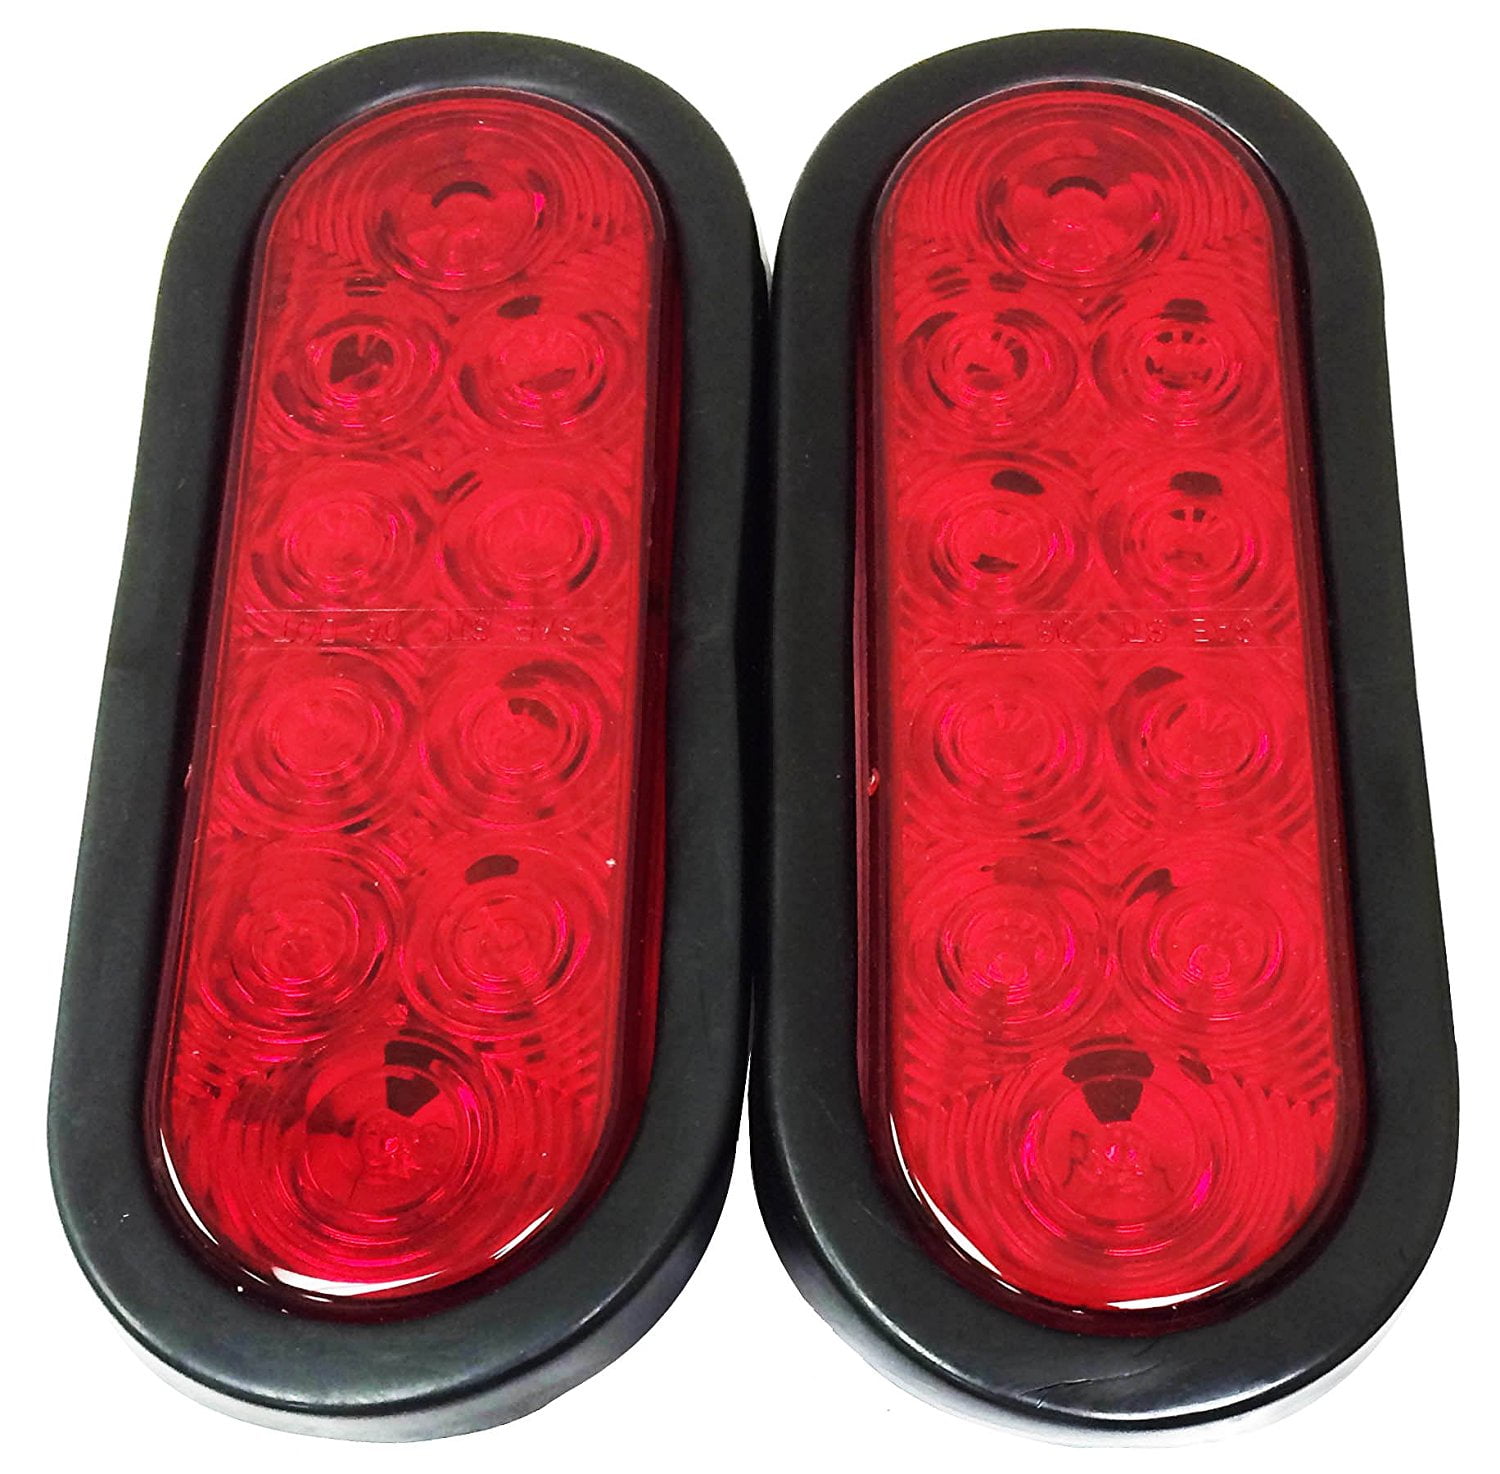 Set of 2 Red 6